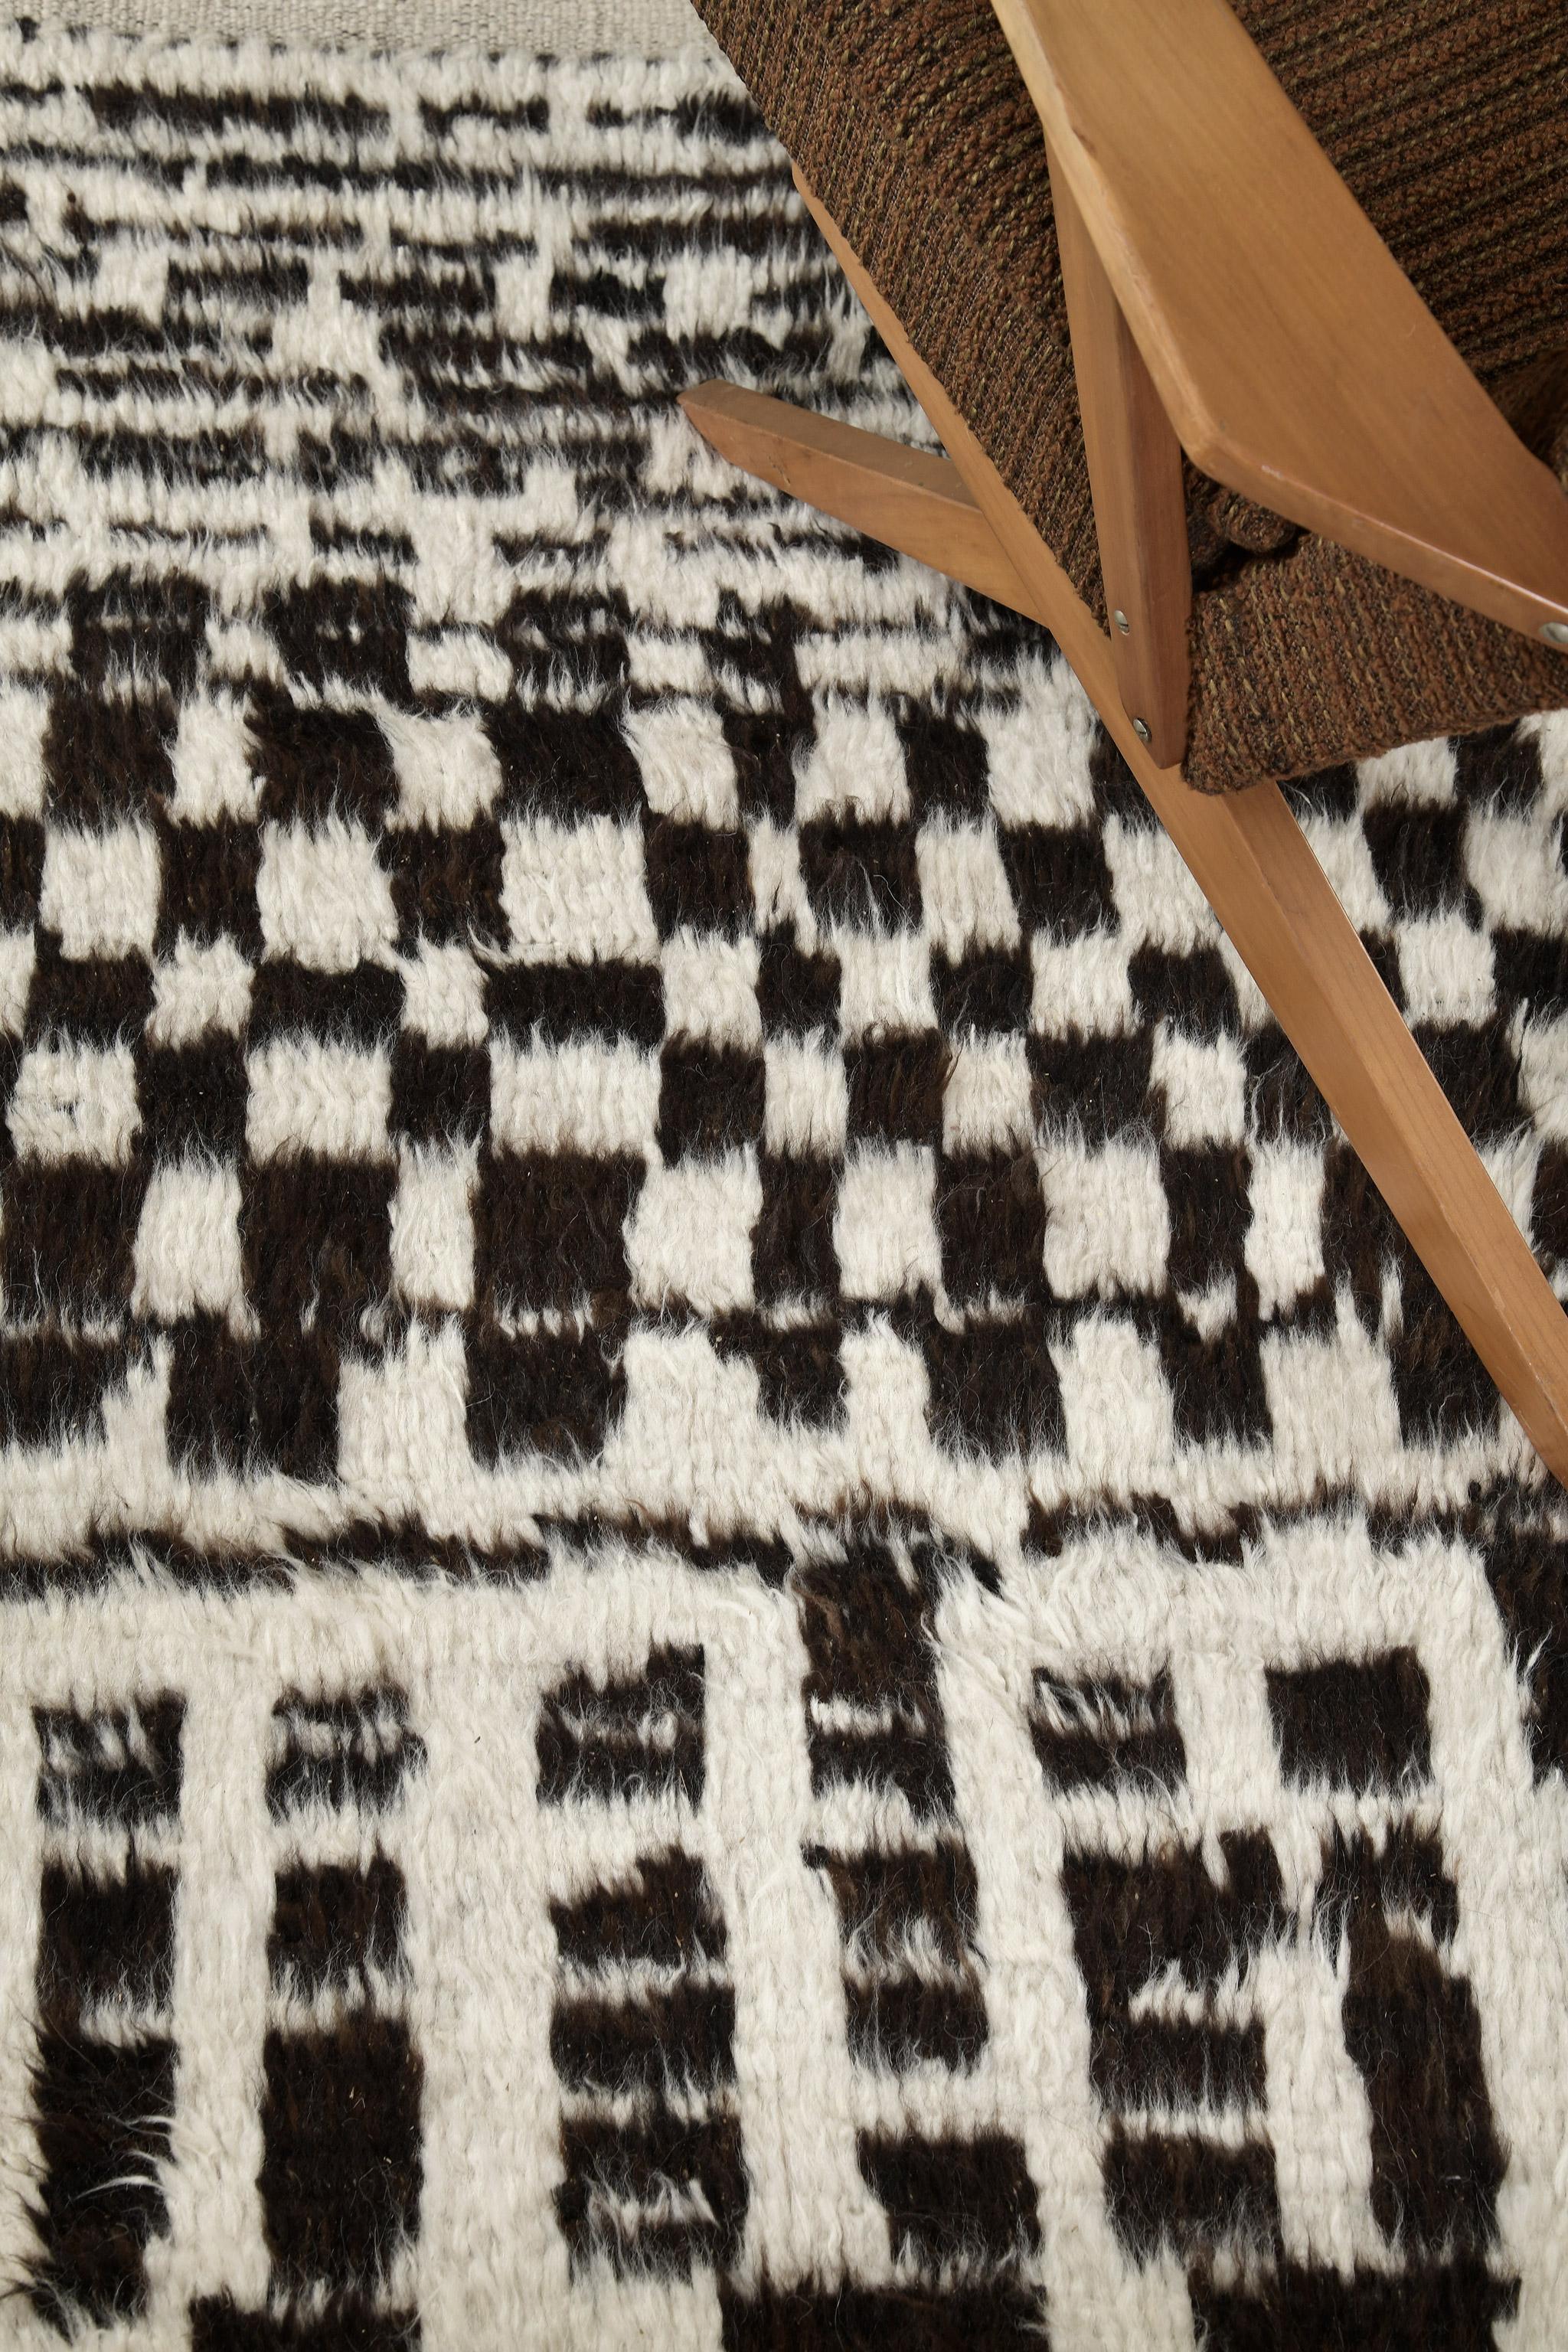 Revealing the series of uneven checkered motifs, Jugo’ is a phenomenal rug that will captivate you in every possible way. Featuring the earthy neutral tones of umber brown and ivory, this rug creates an impressive pattern perfect to be placed in an